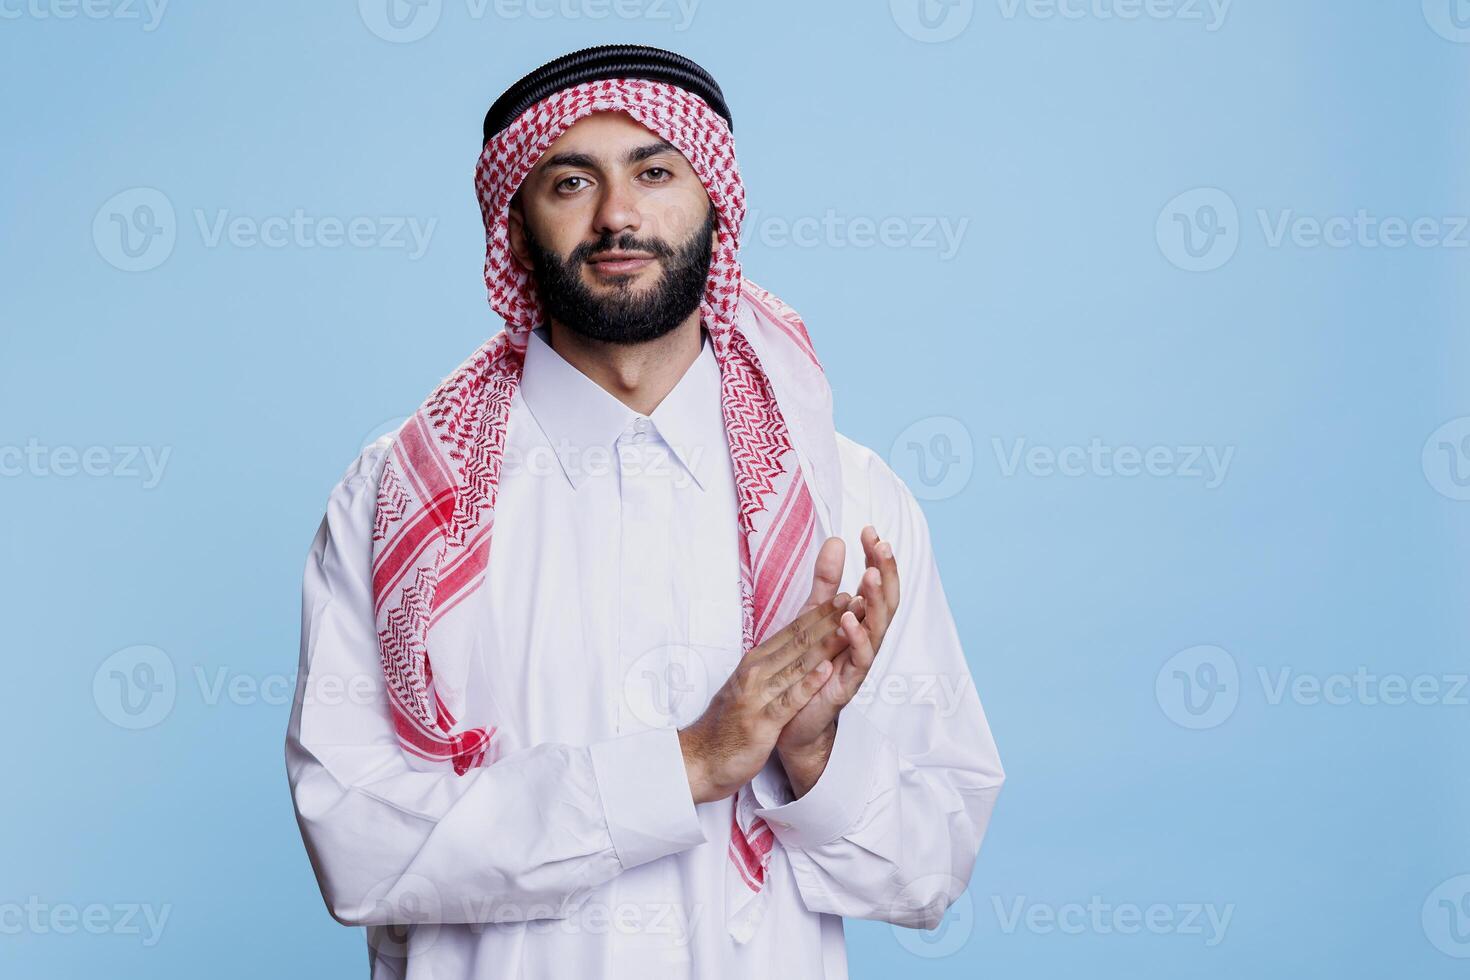 Confident muslim man wearing traditional islamic clothes applauding while looking at camera. Young arab dressed in white thobe and checkered ghutra clapping hands studio portrait photo